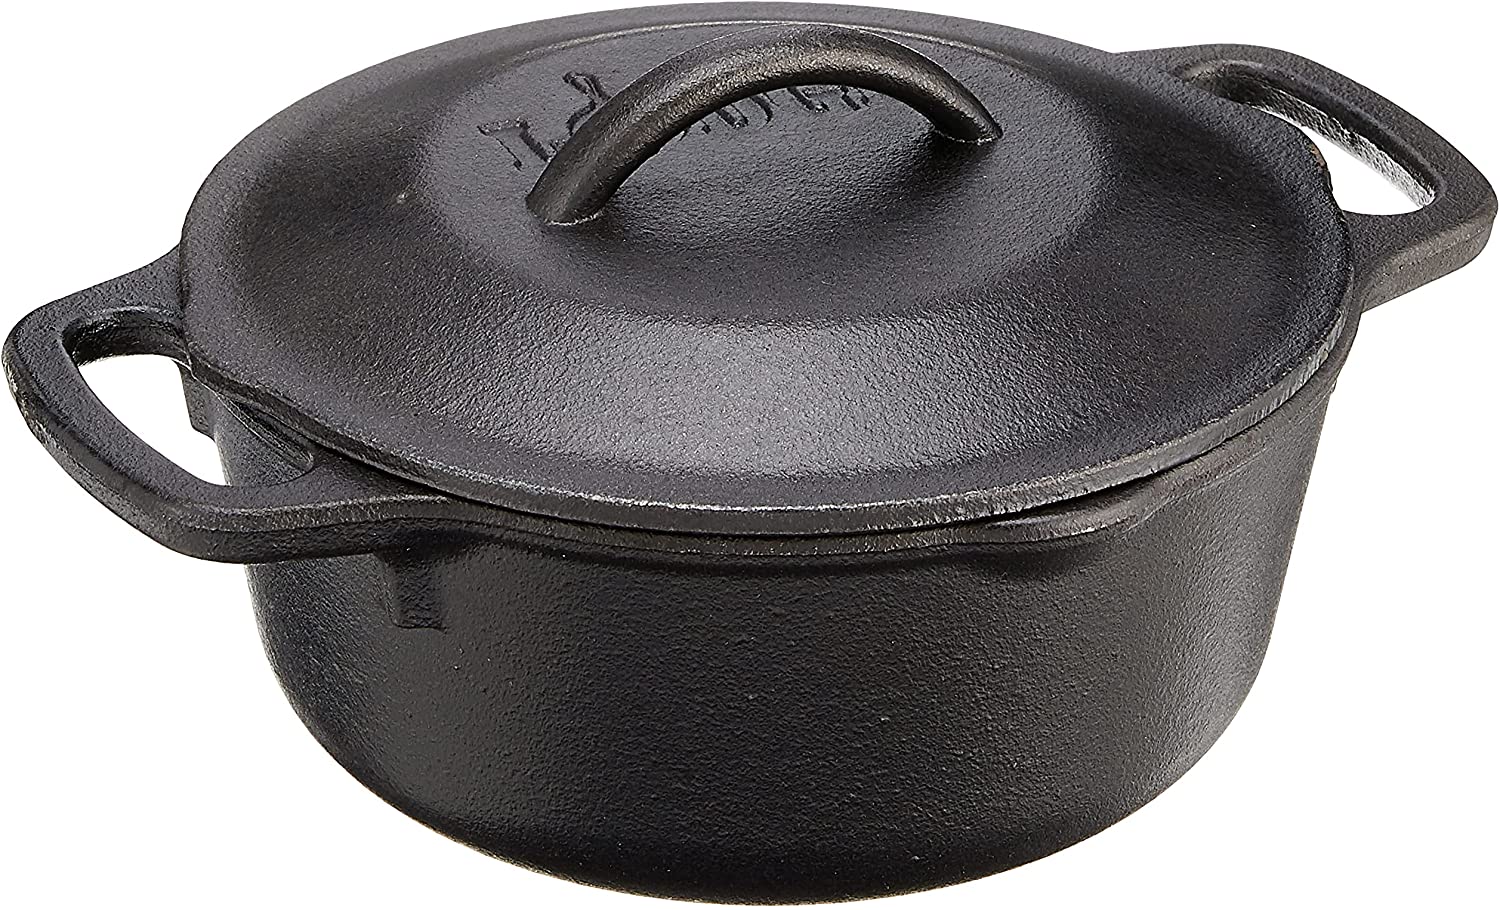 1-Quart Lodge Cast Iron Serving Pot w/ Lid $19.93 + Free shipping with Prime or on orders over $25